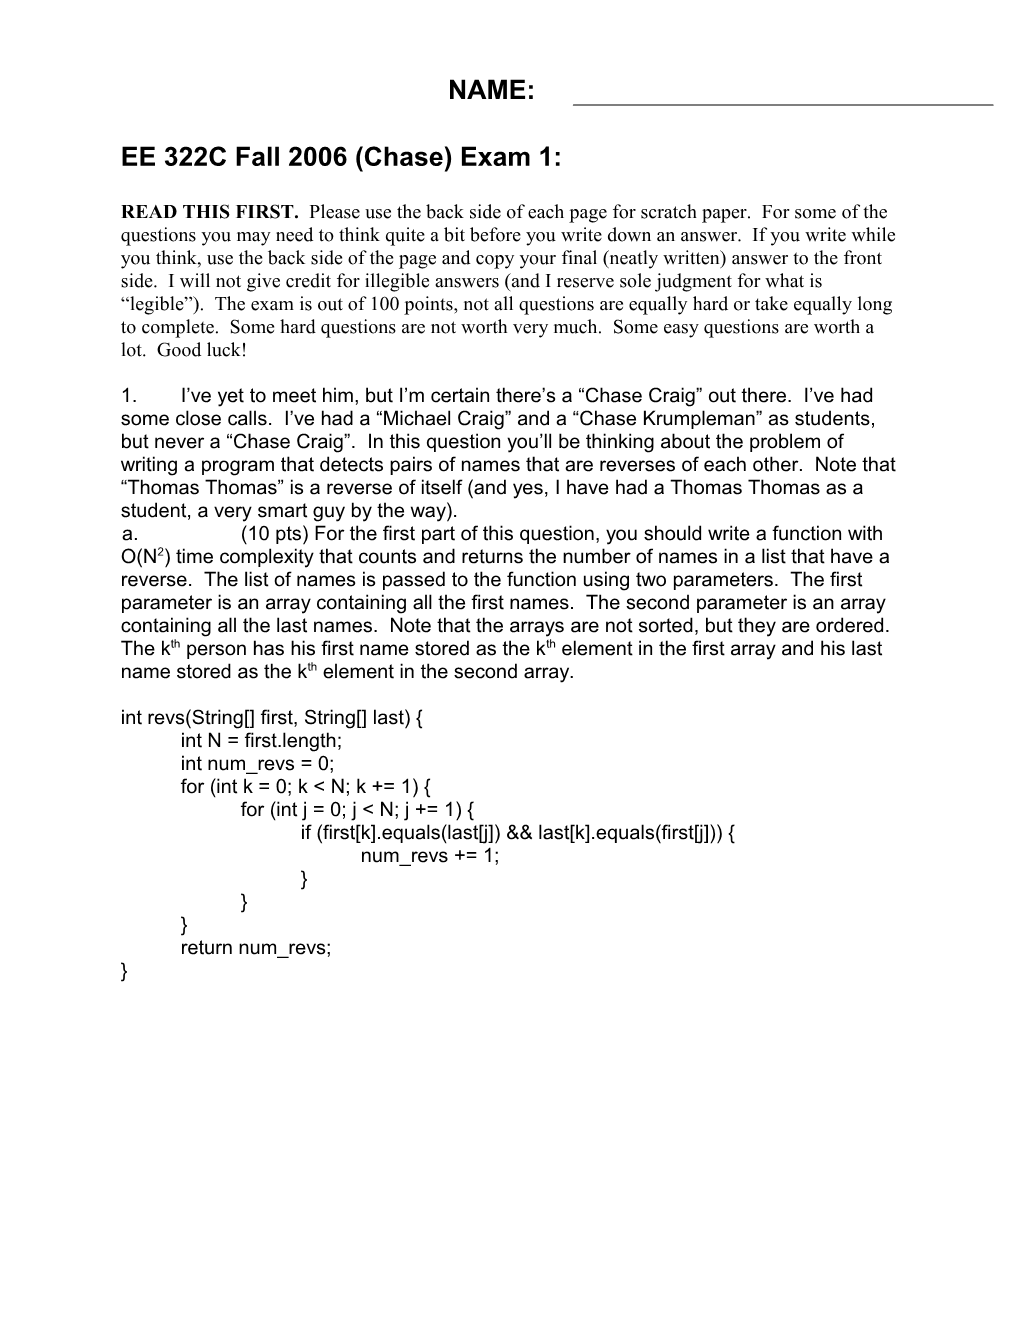 EE 322C Fall 2004 (Chase) Exam 1